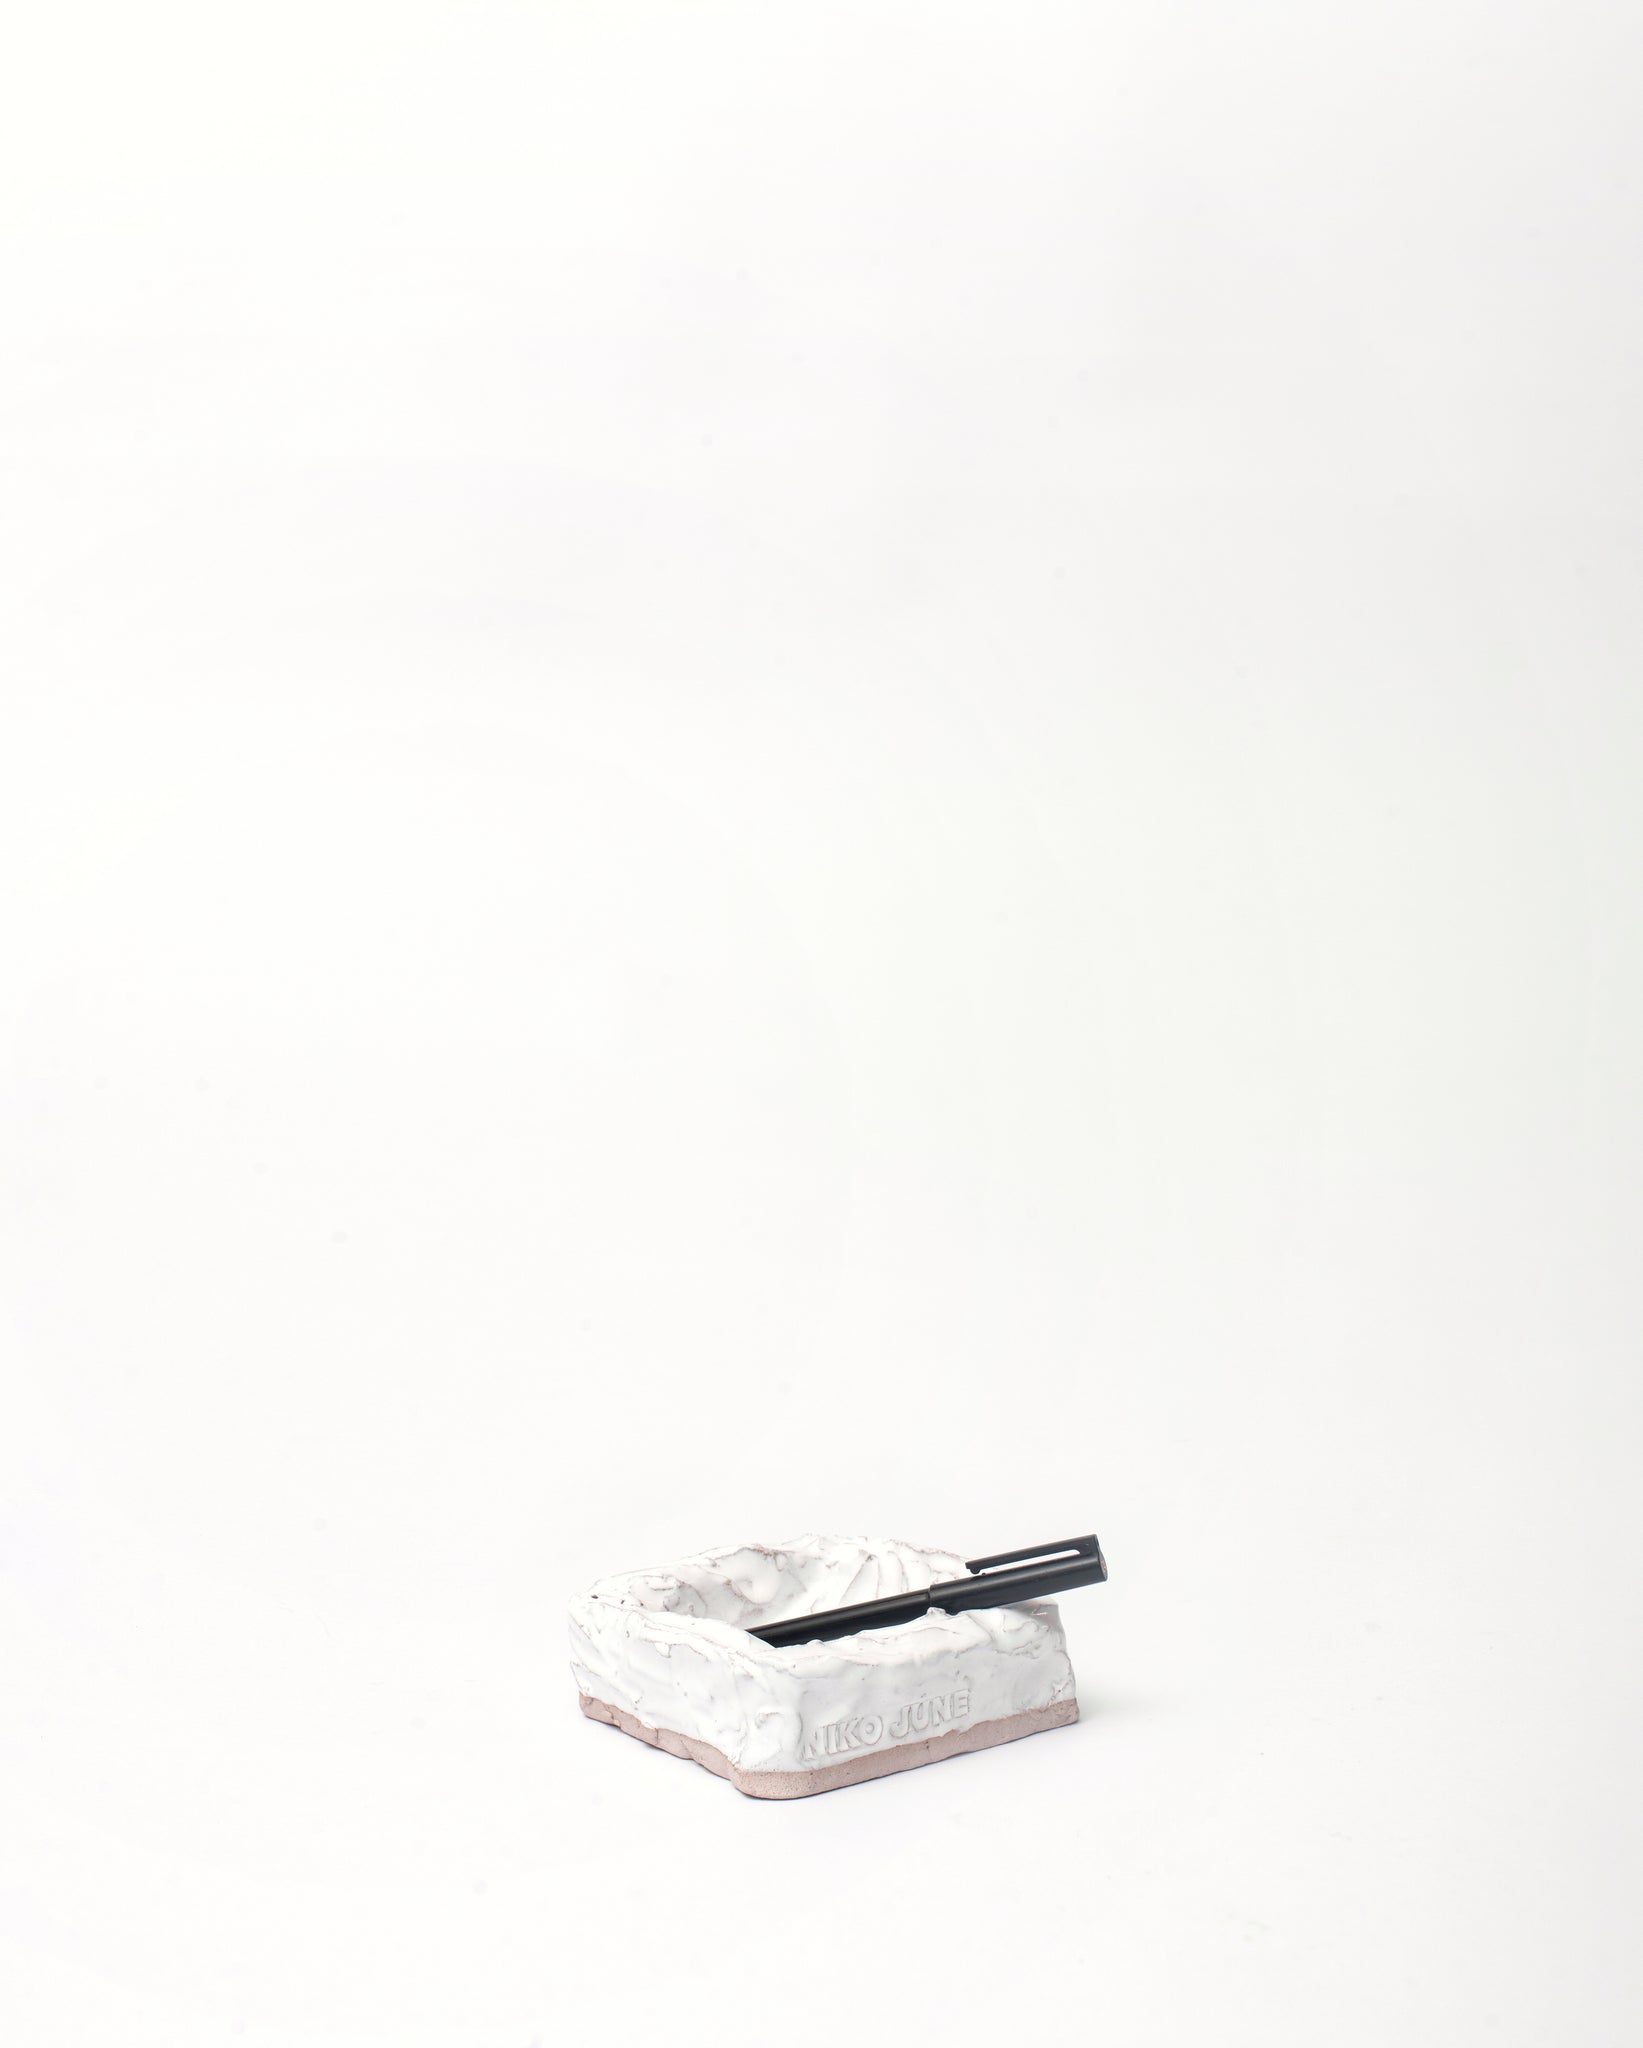 White background, Handmade jewelry ceramic organizer white in vertical inclination with black pen lying on its side